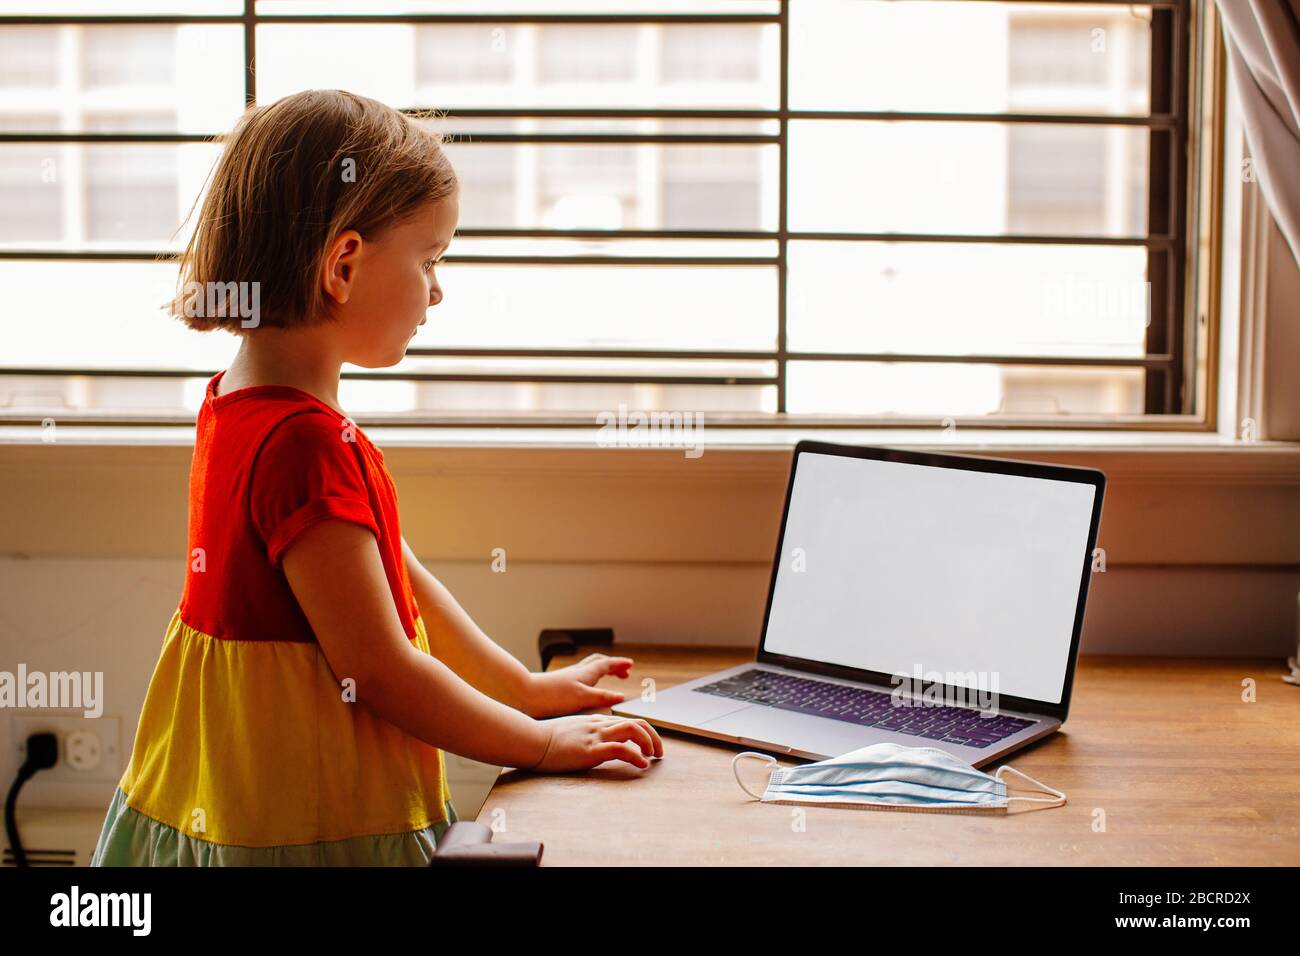 Portrait of a small preschool child with laptop computer and surgical face mask, using internet online at home by the window Stock Photo